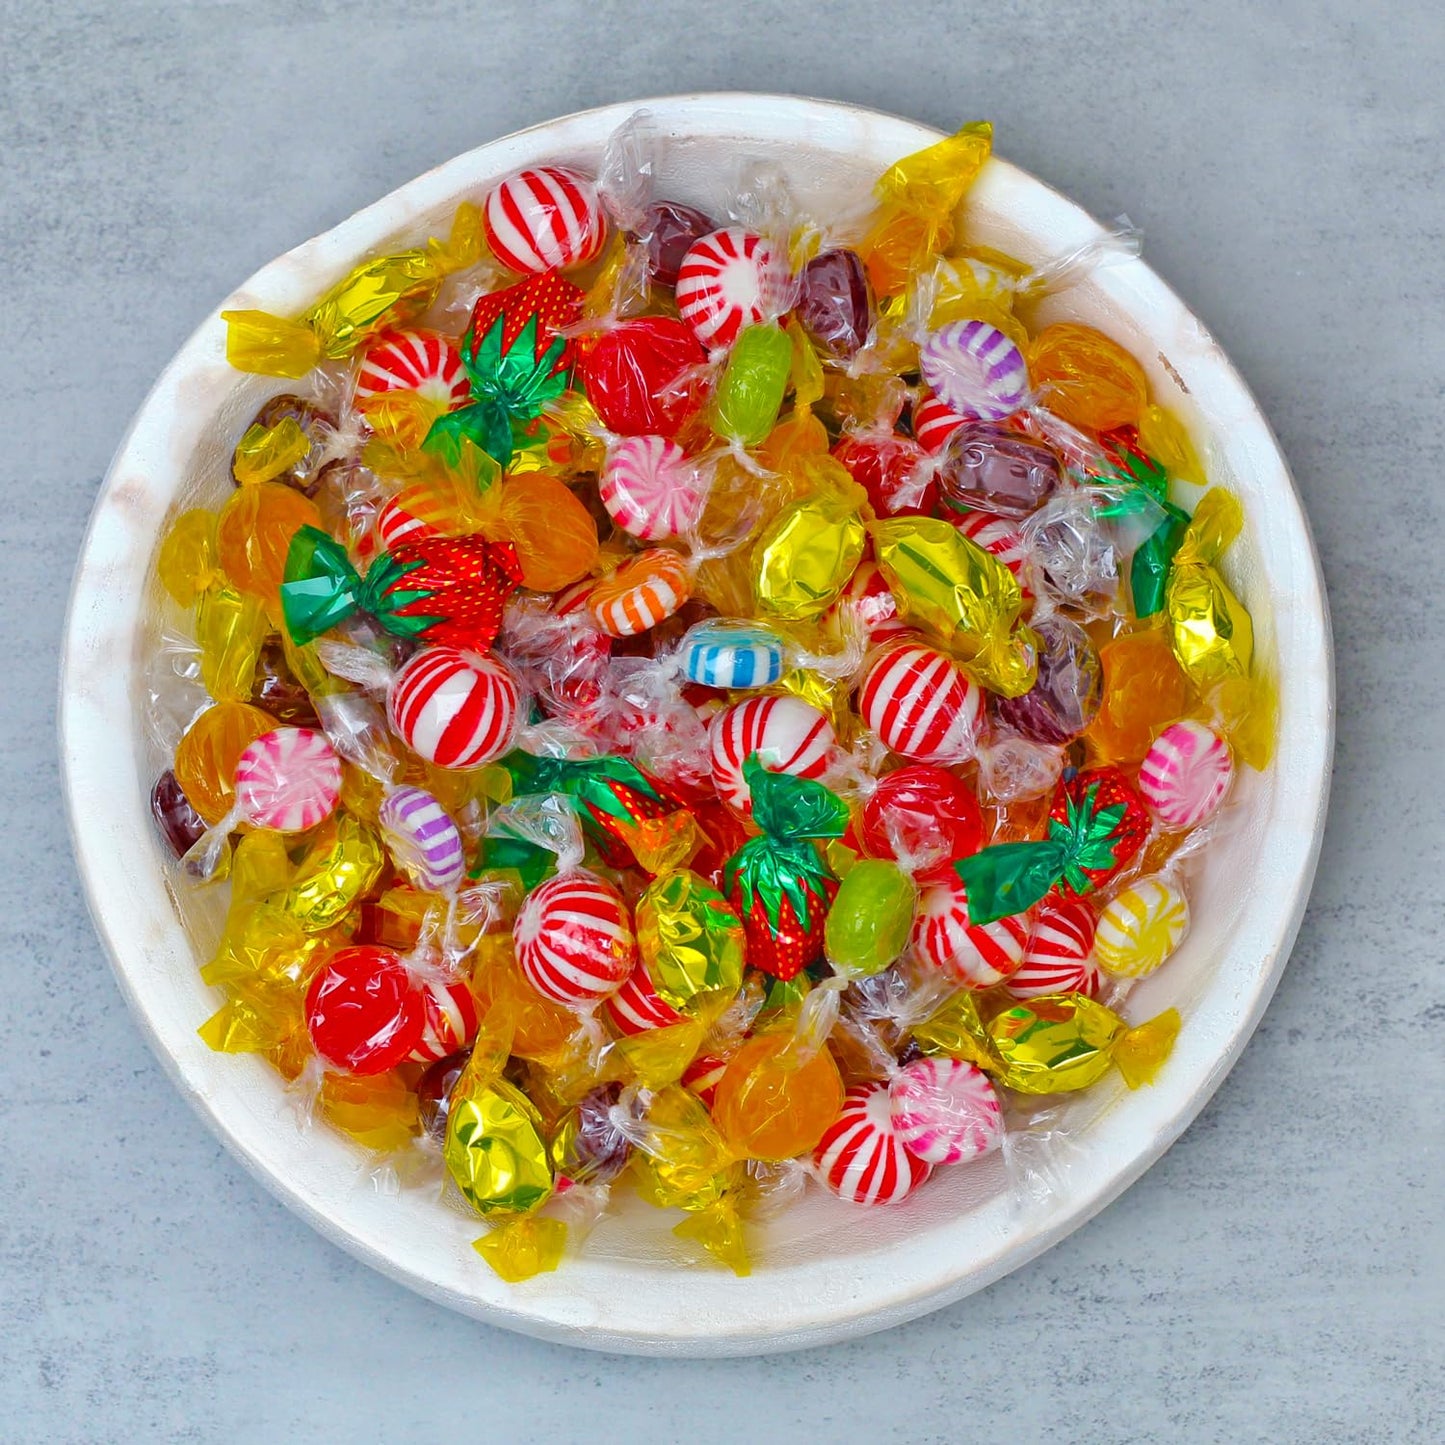 Hard Candy Mix - 3 LB Bulk Variety Candy Bag - Assorted Classic Hard Candy - Large Candy Bag for Office, Party Favor Filler - Individually Wrapped Hard Candy - Mint, Starlight, Toffee, Butterscotch, Strawberry and More